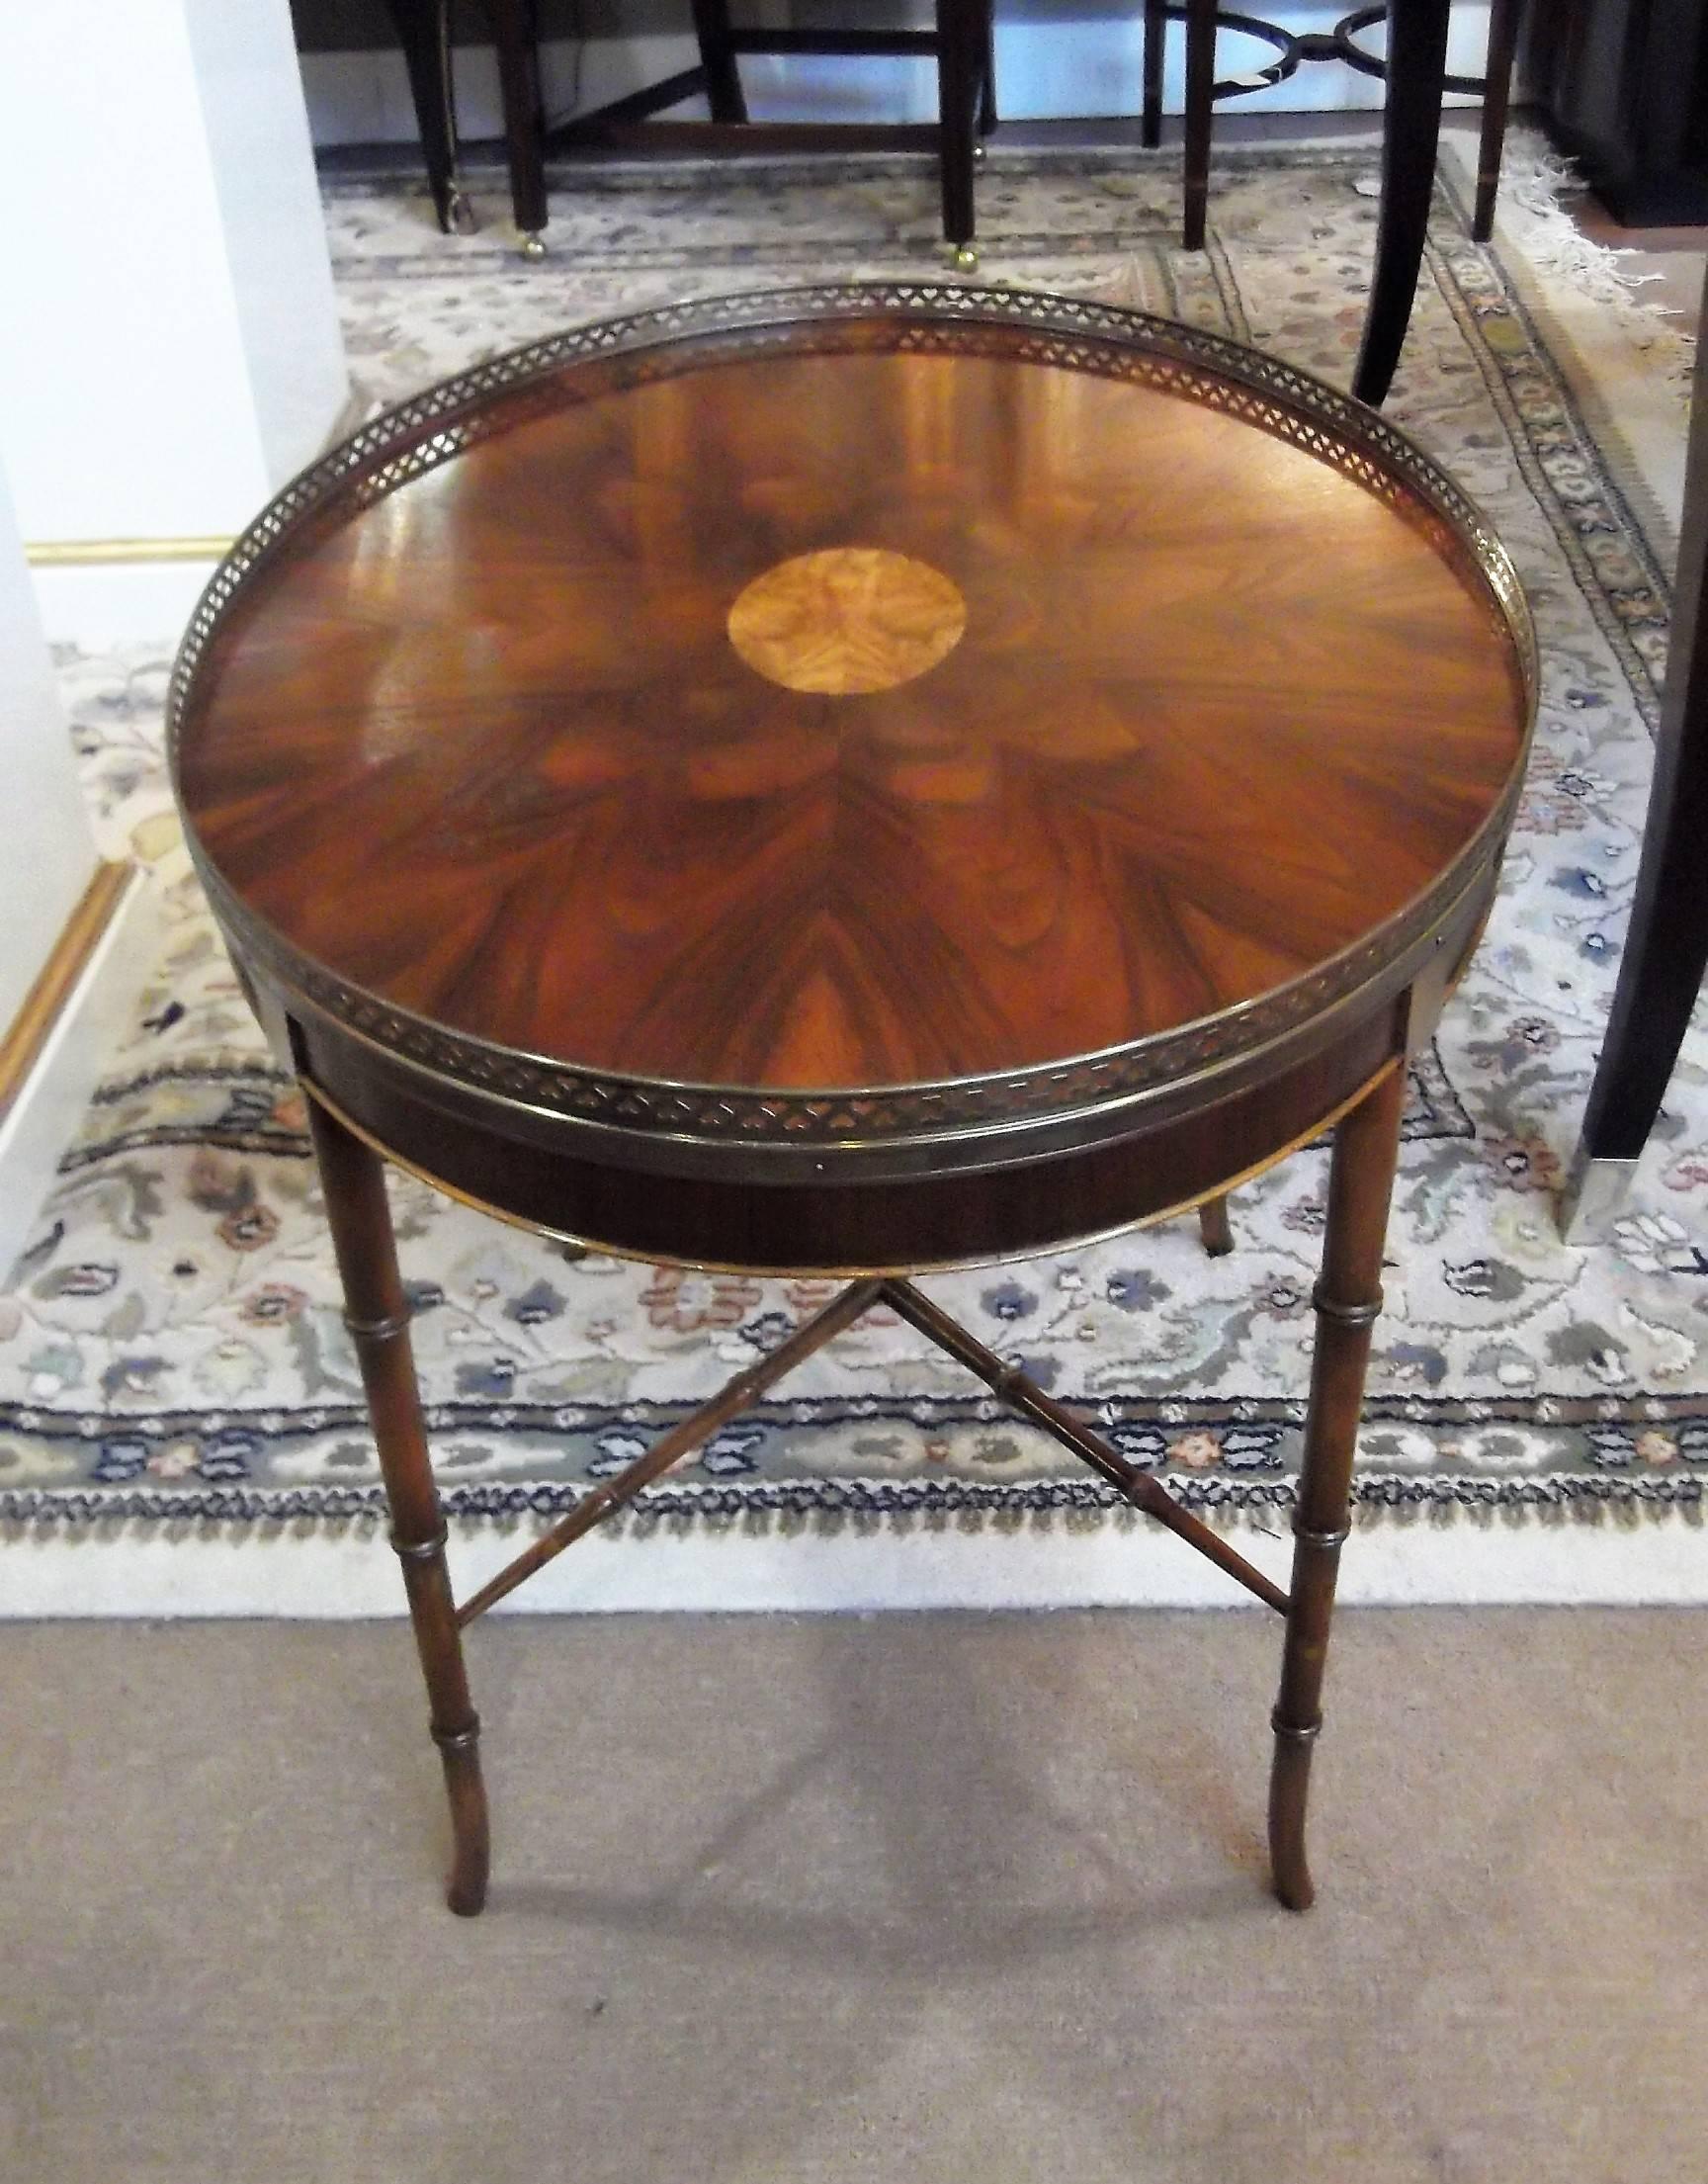 Regency Oval Gallery Top Cocktail Table by Baker Furniture